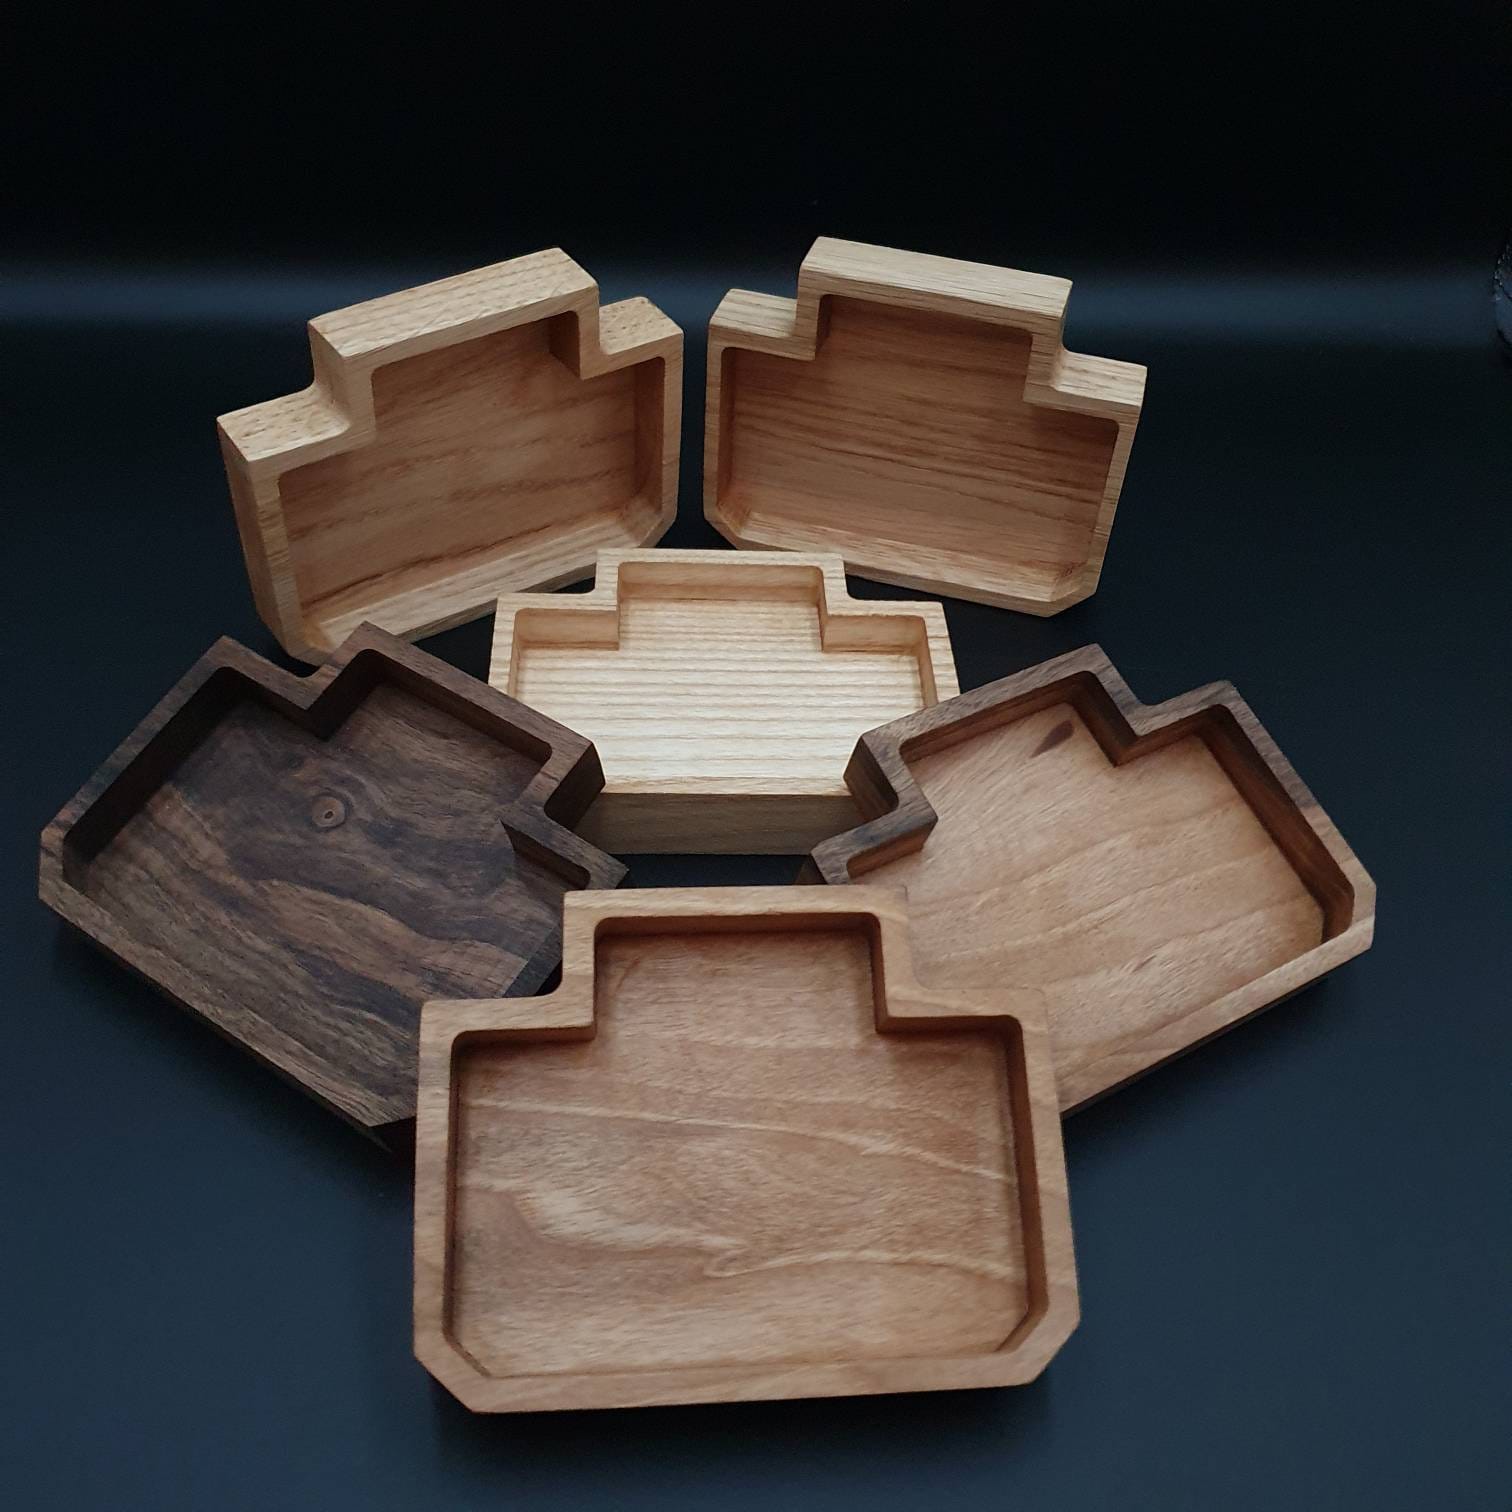 Eureka Mignon Wooden Drip Tray Specialita / Perfetto and Others Elegant  Drip Tray-food Contact Compliance-express SHIPPING 